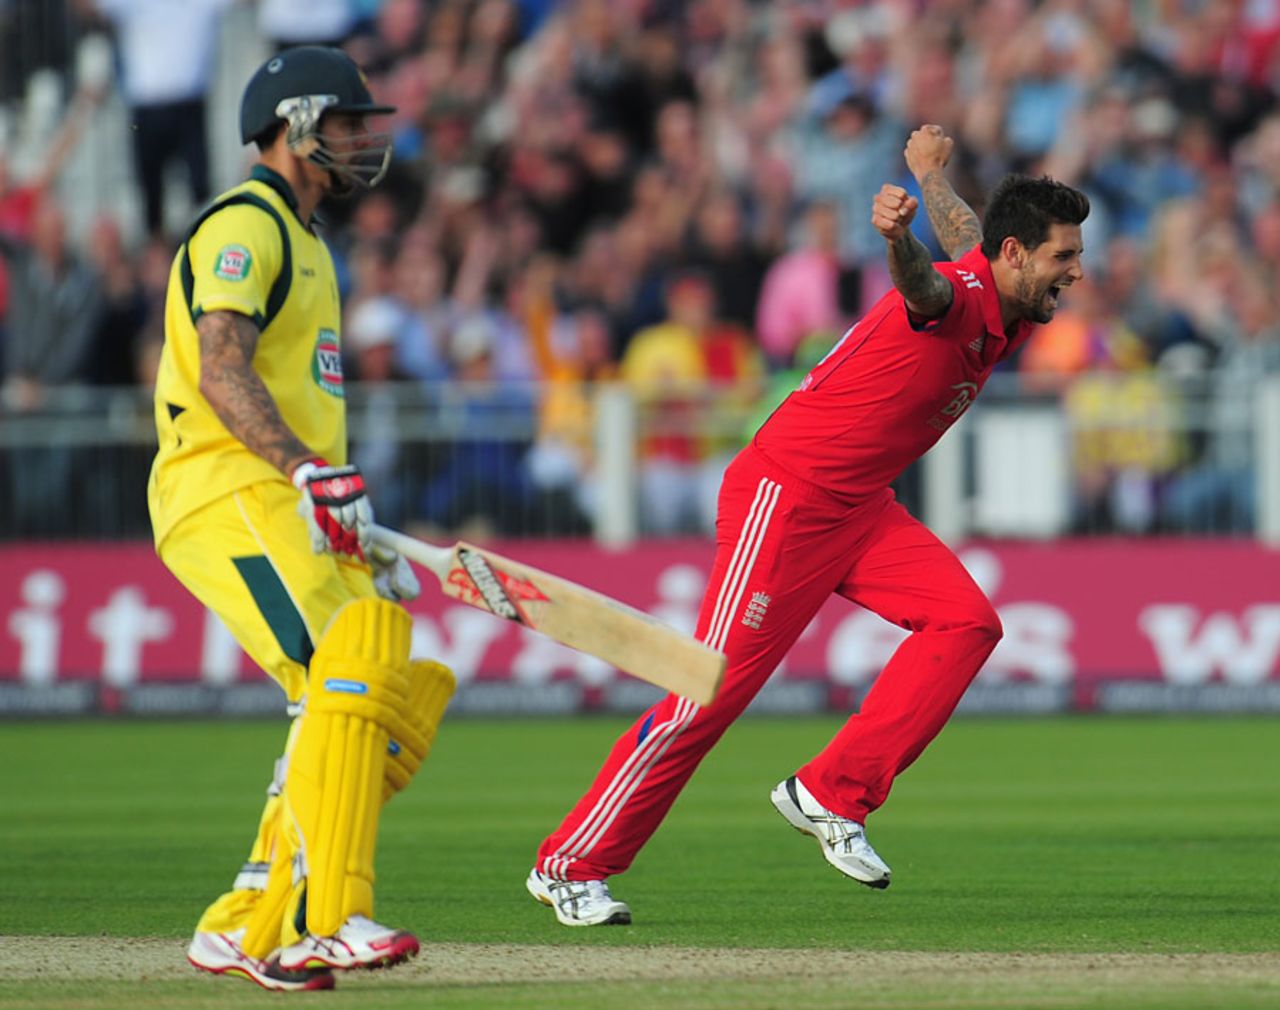 Jade Dernbach was the pick of England's quick bowlers, England v Australia, 2nd T20, Chester-le-Street, August 31, 2013